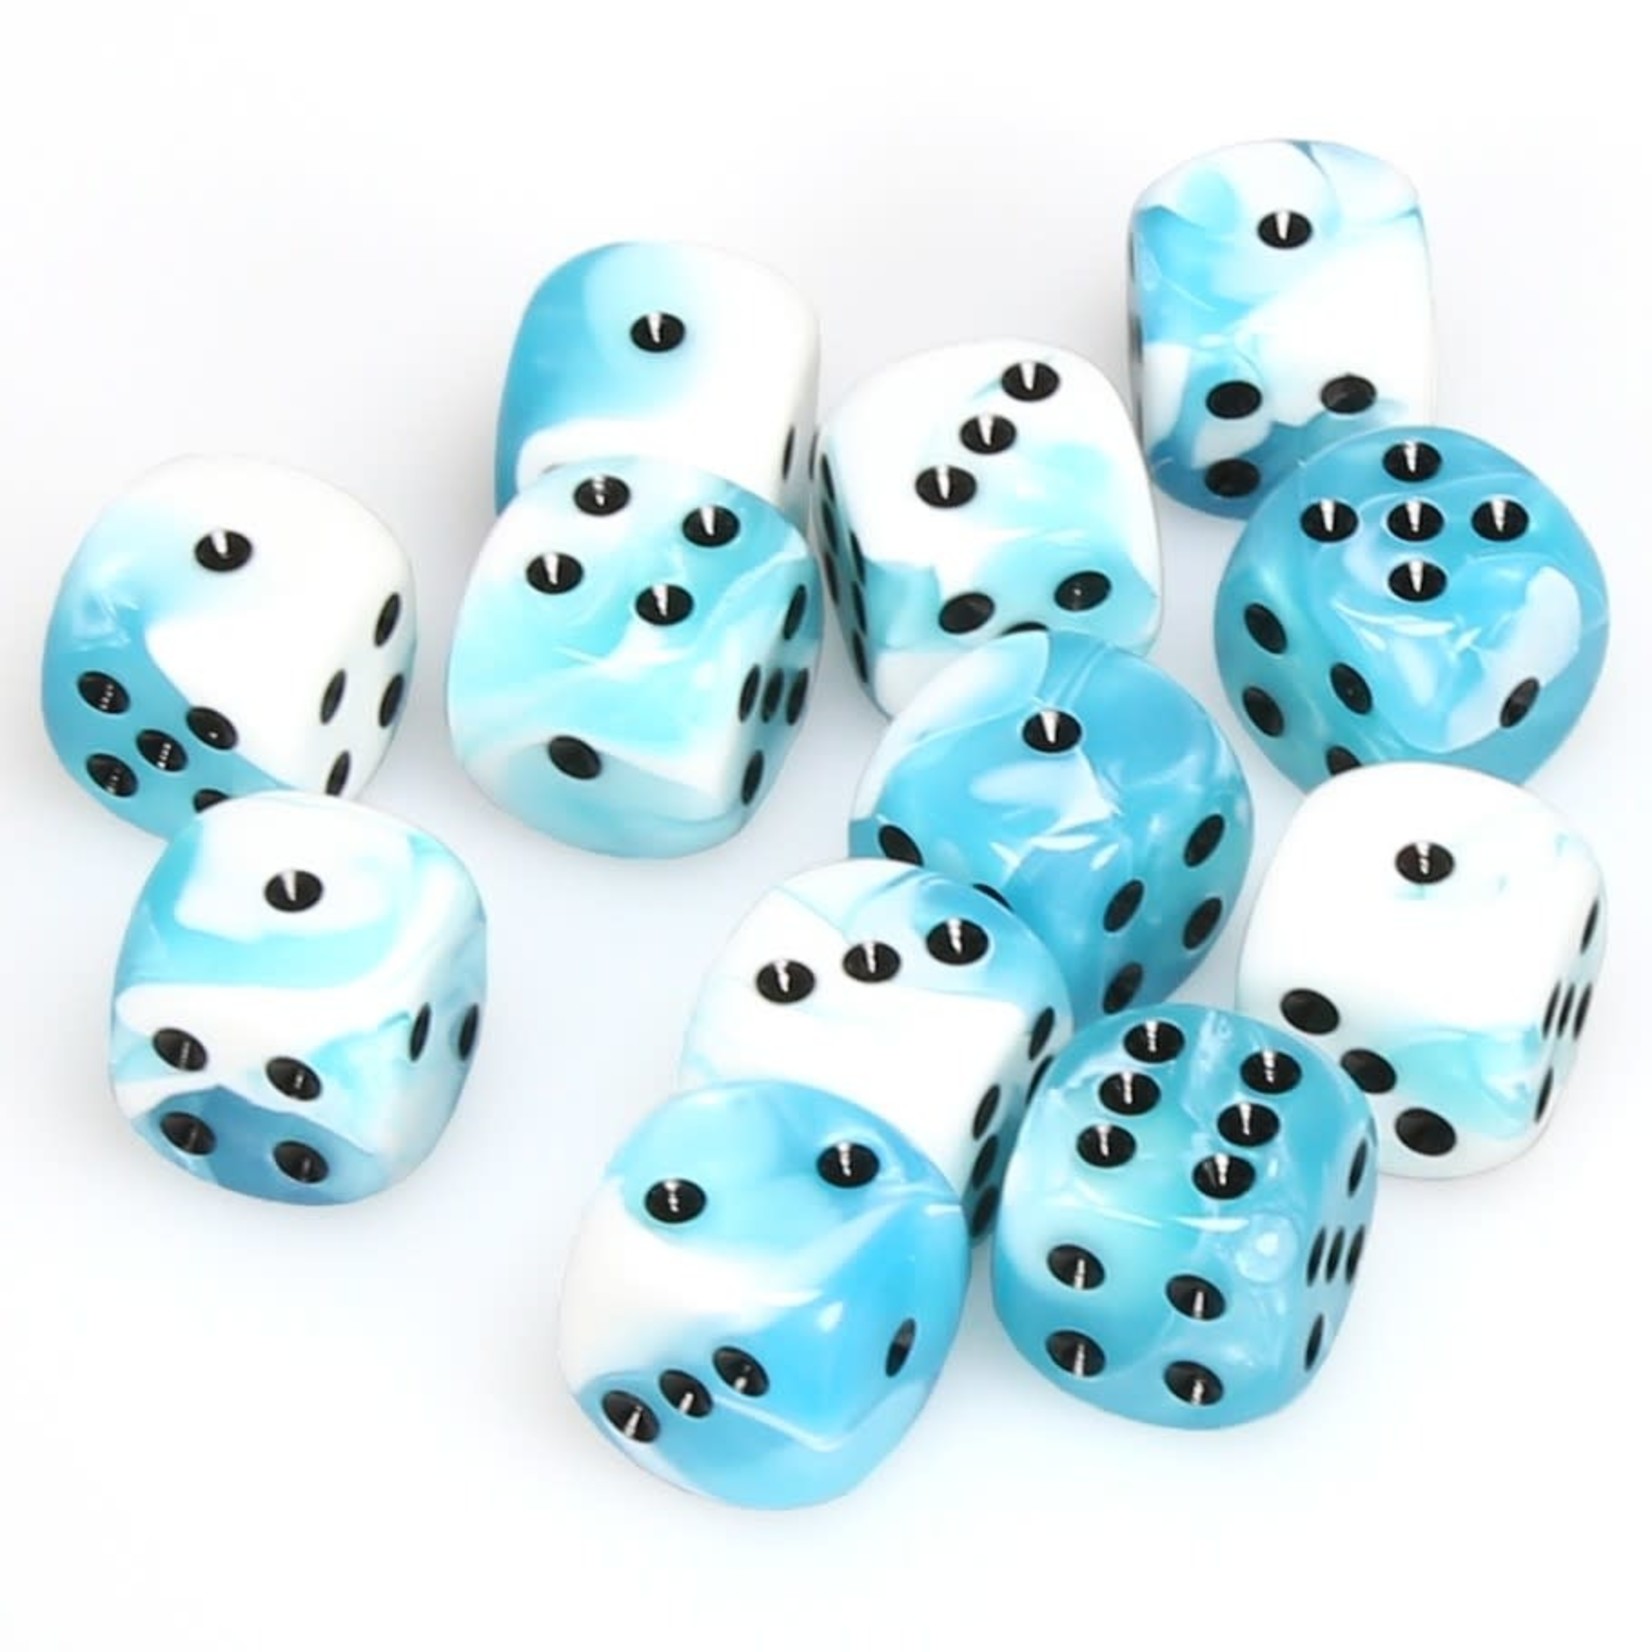 Chessex Chessex Gemini White / Teal with Black 16 mm d6 12 die set